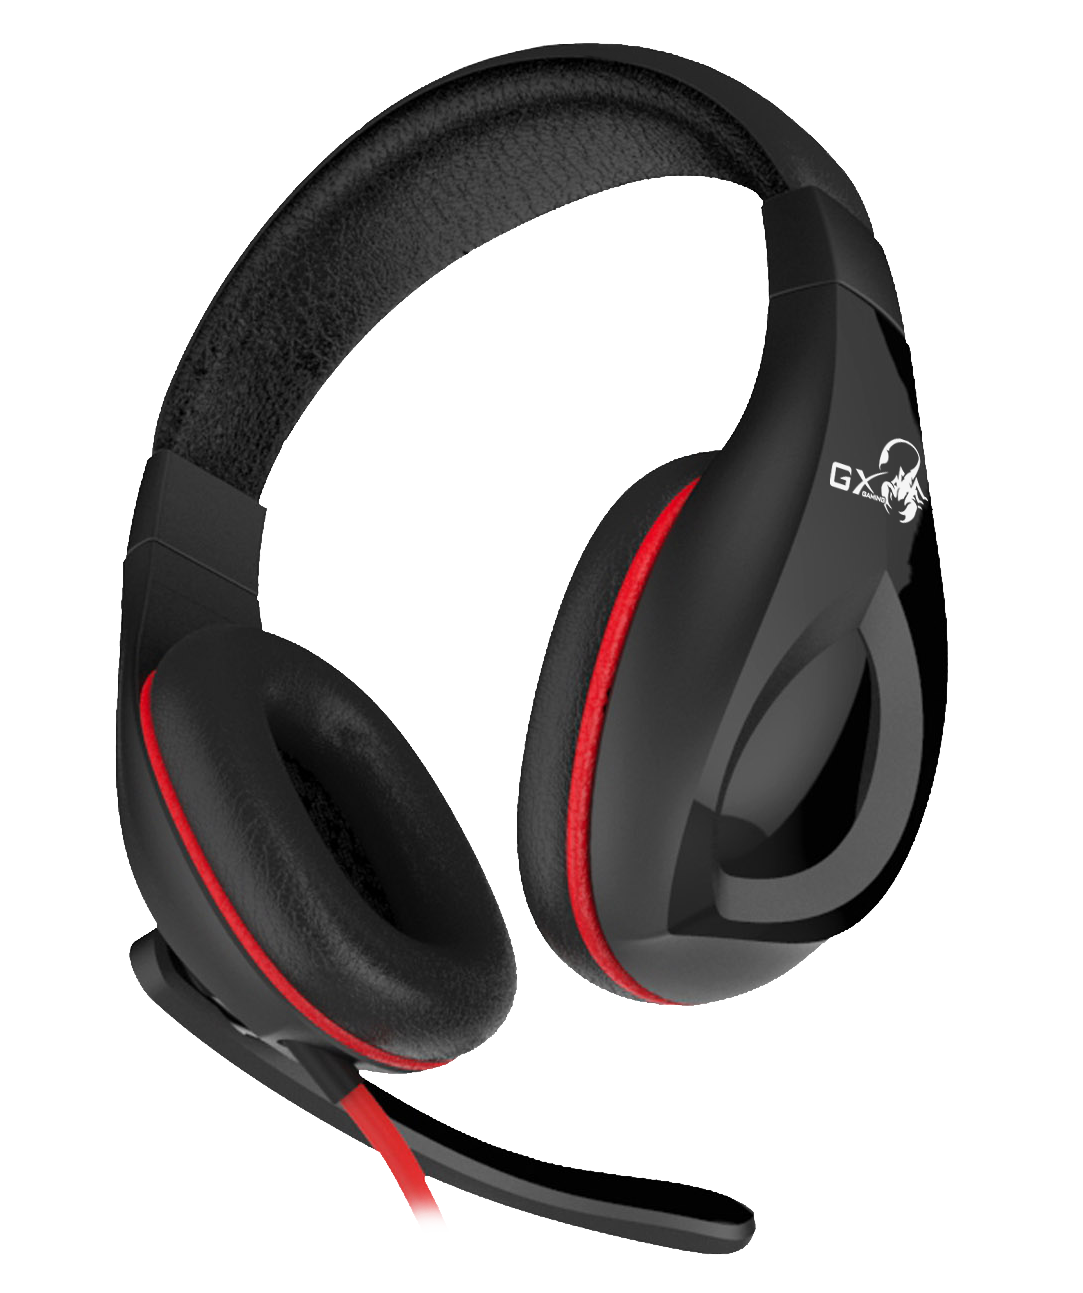 Wholesale gx headset : hs-g560 immersive surround sound lightweight soft leather headband and earcups